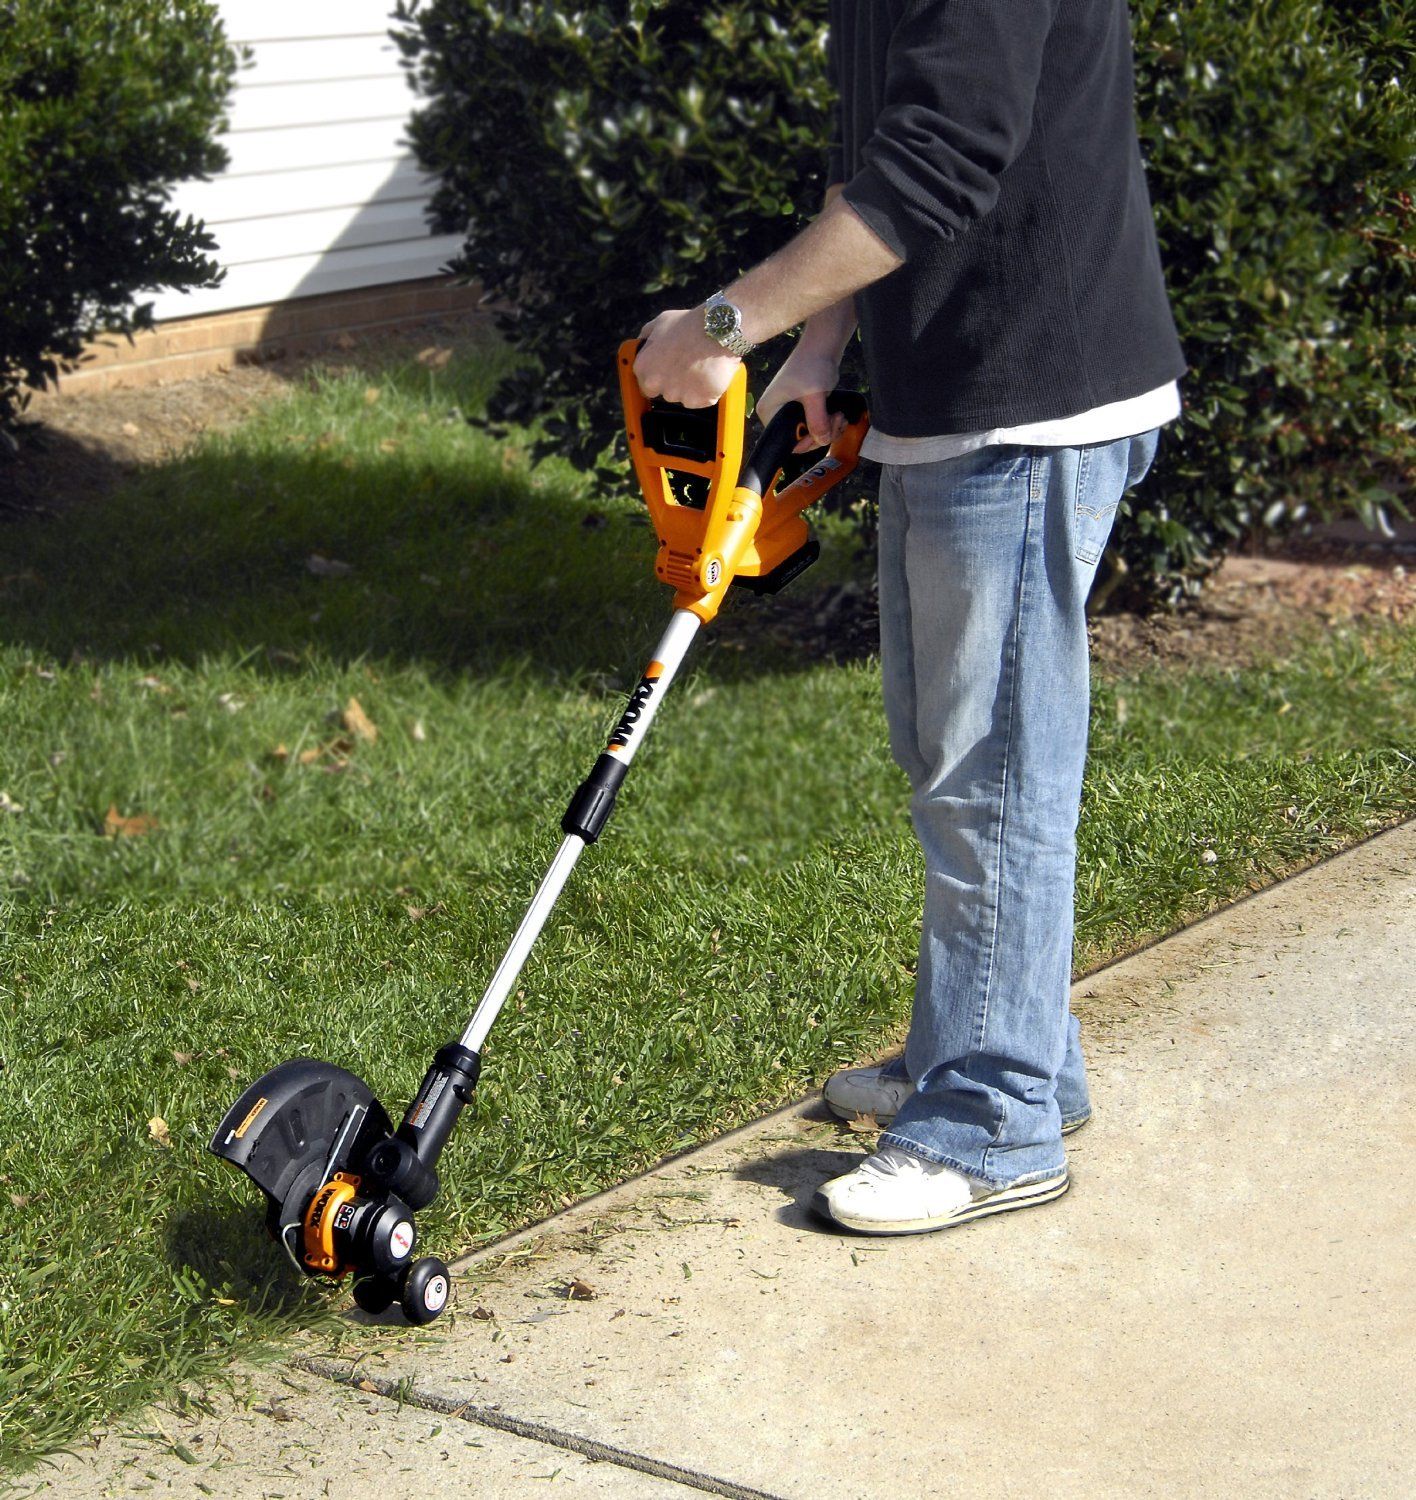 Edge Trimmer For Lawn